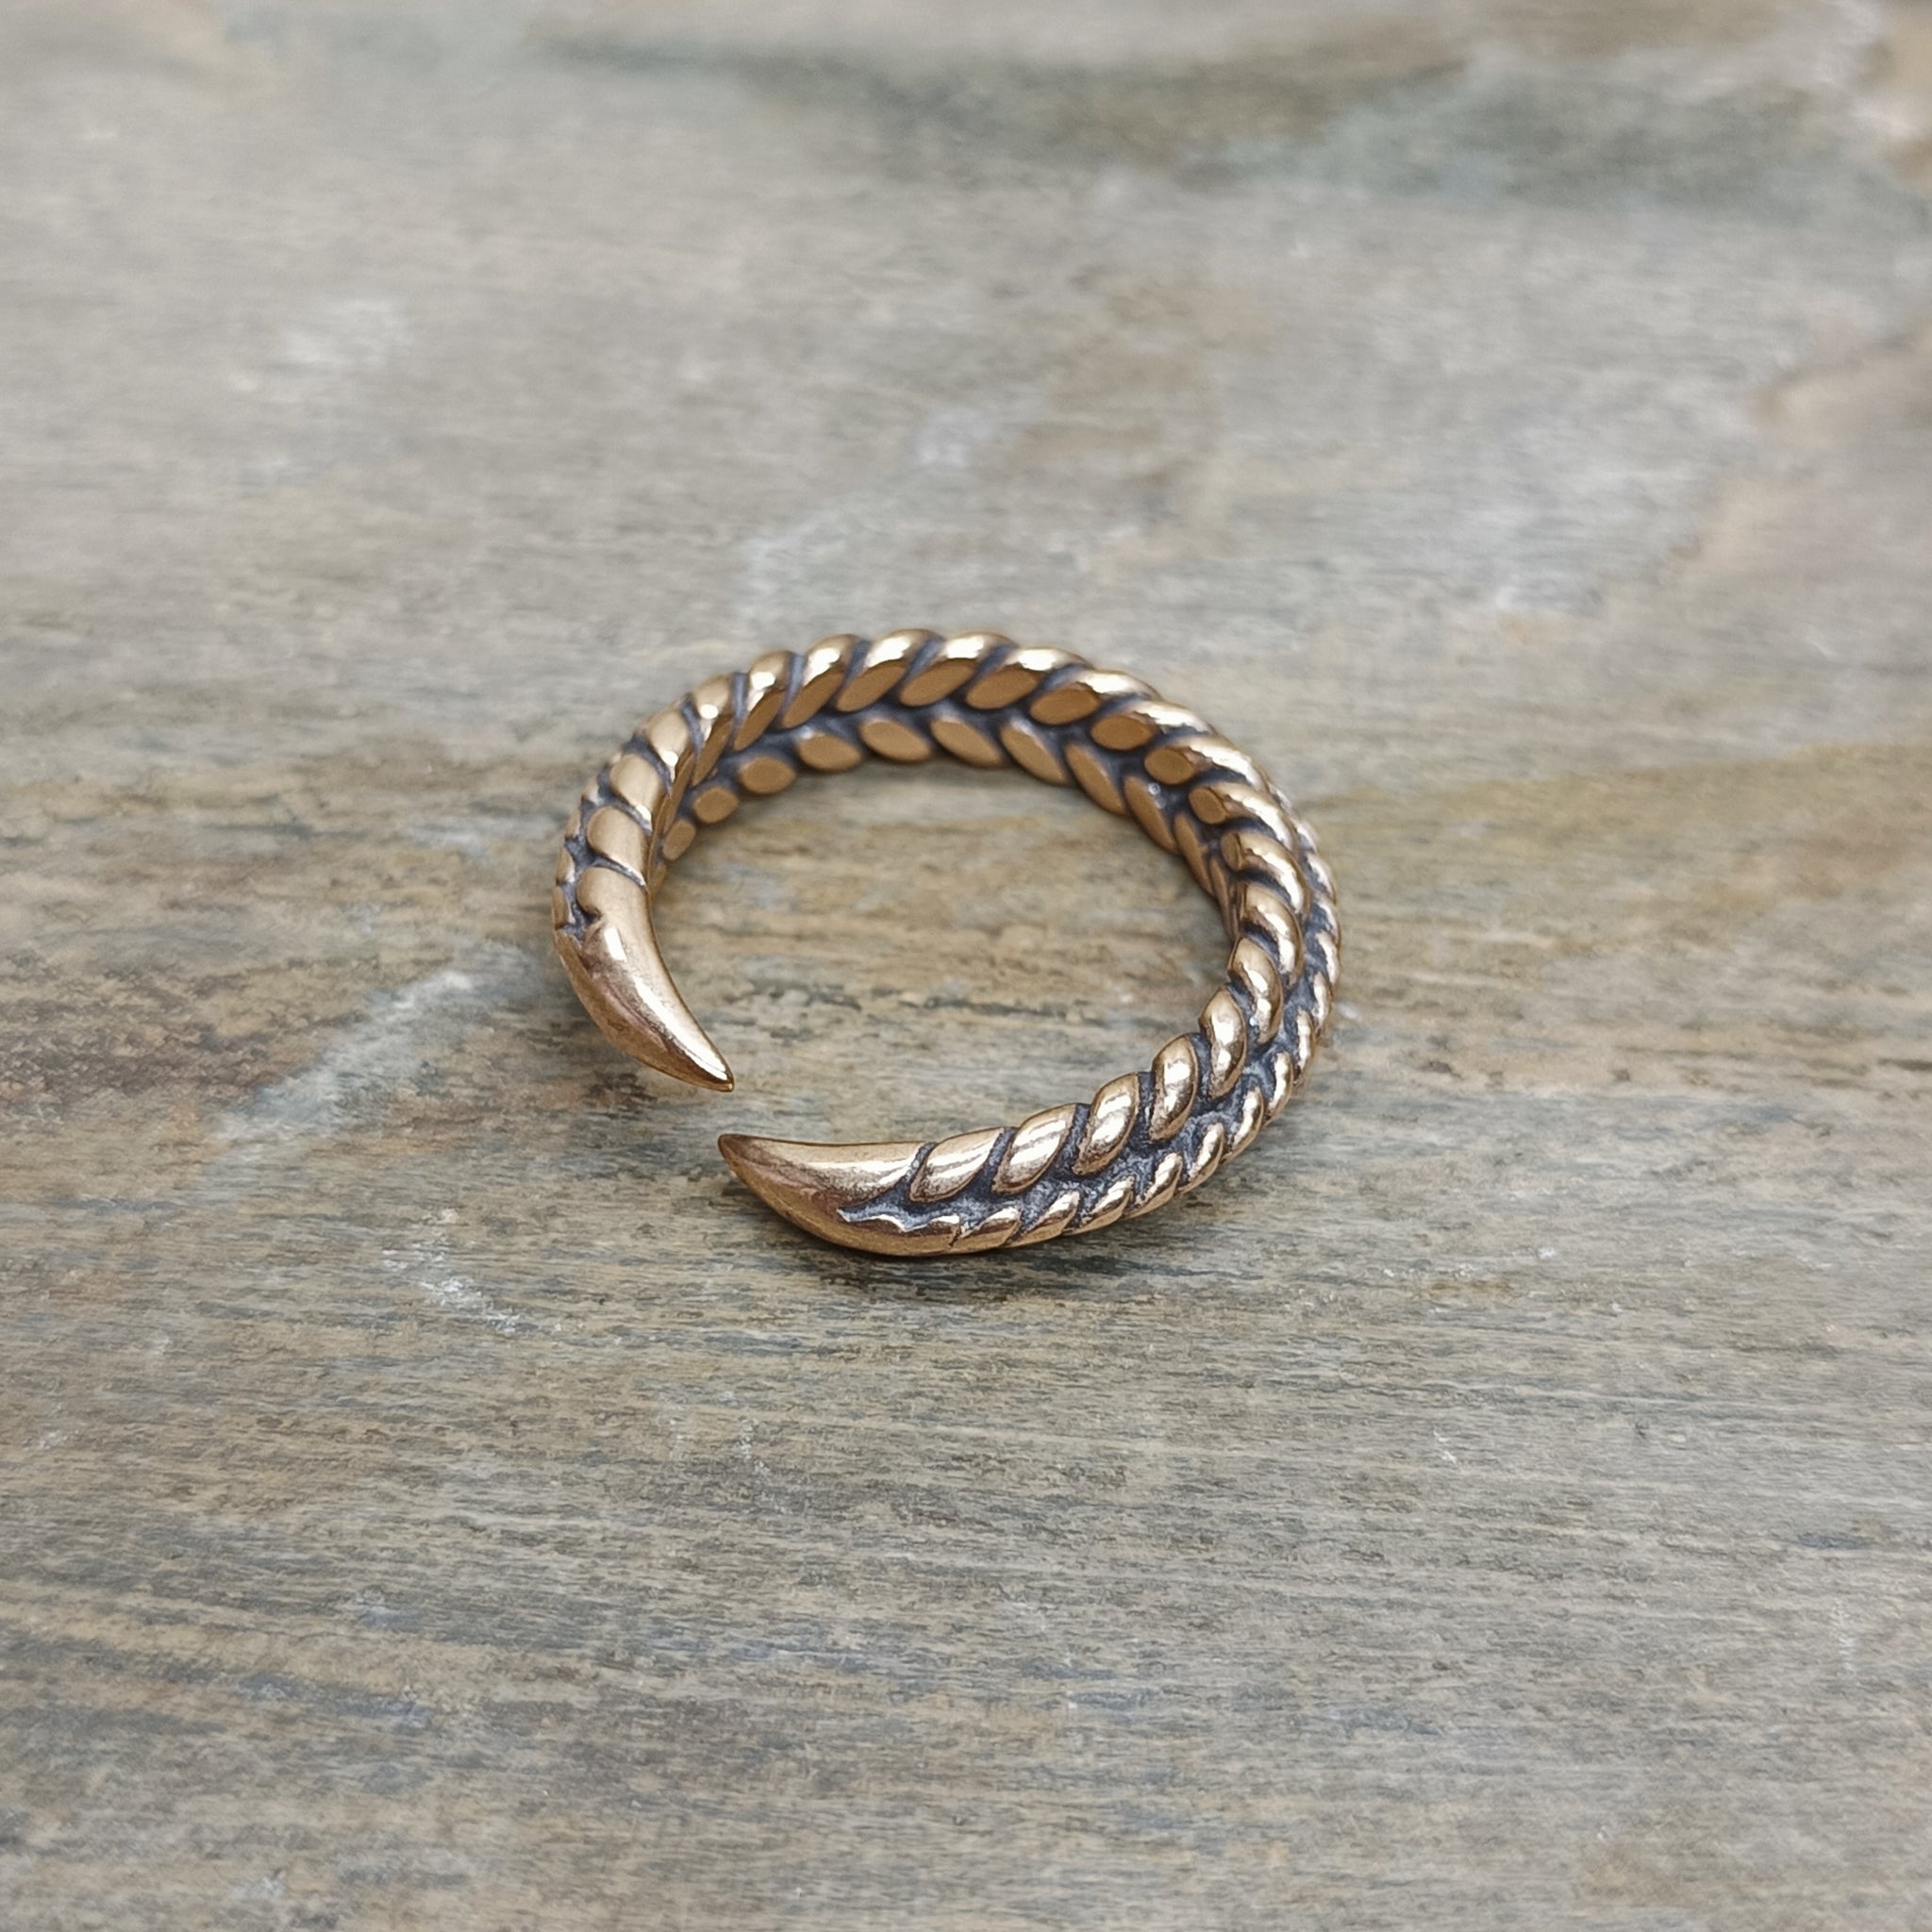 Bronze Braided Viking Ring on Stone - Back Angle View